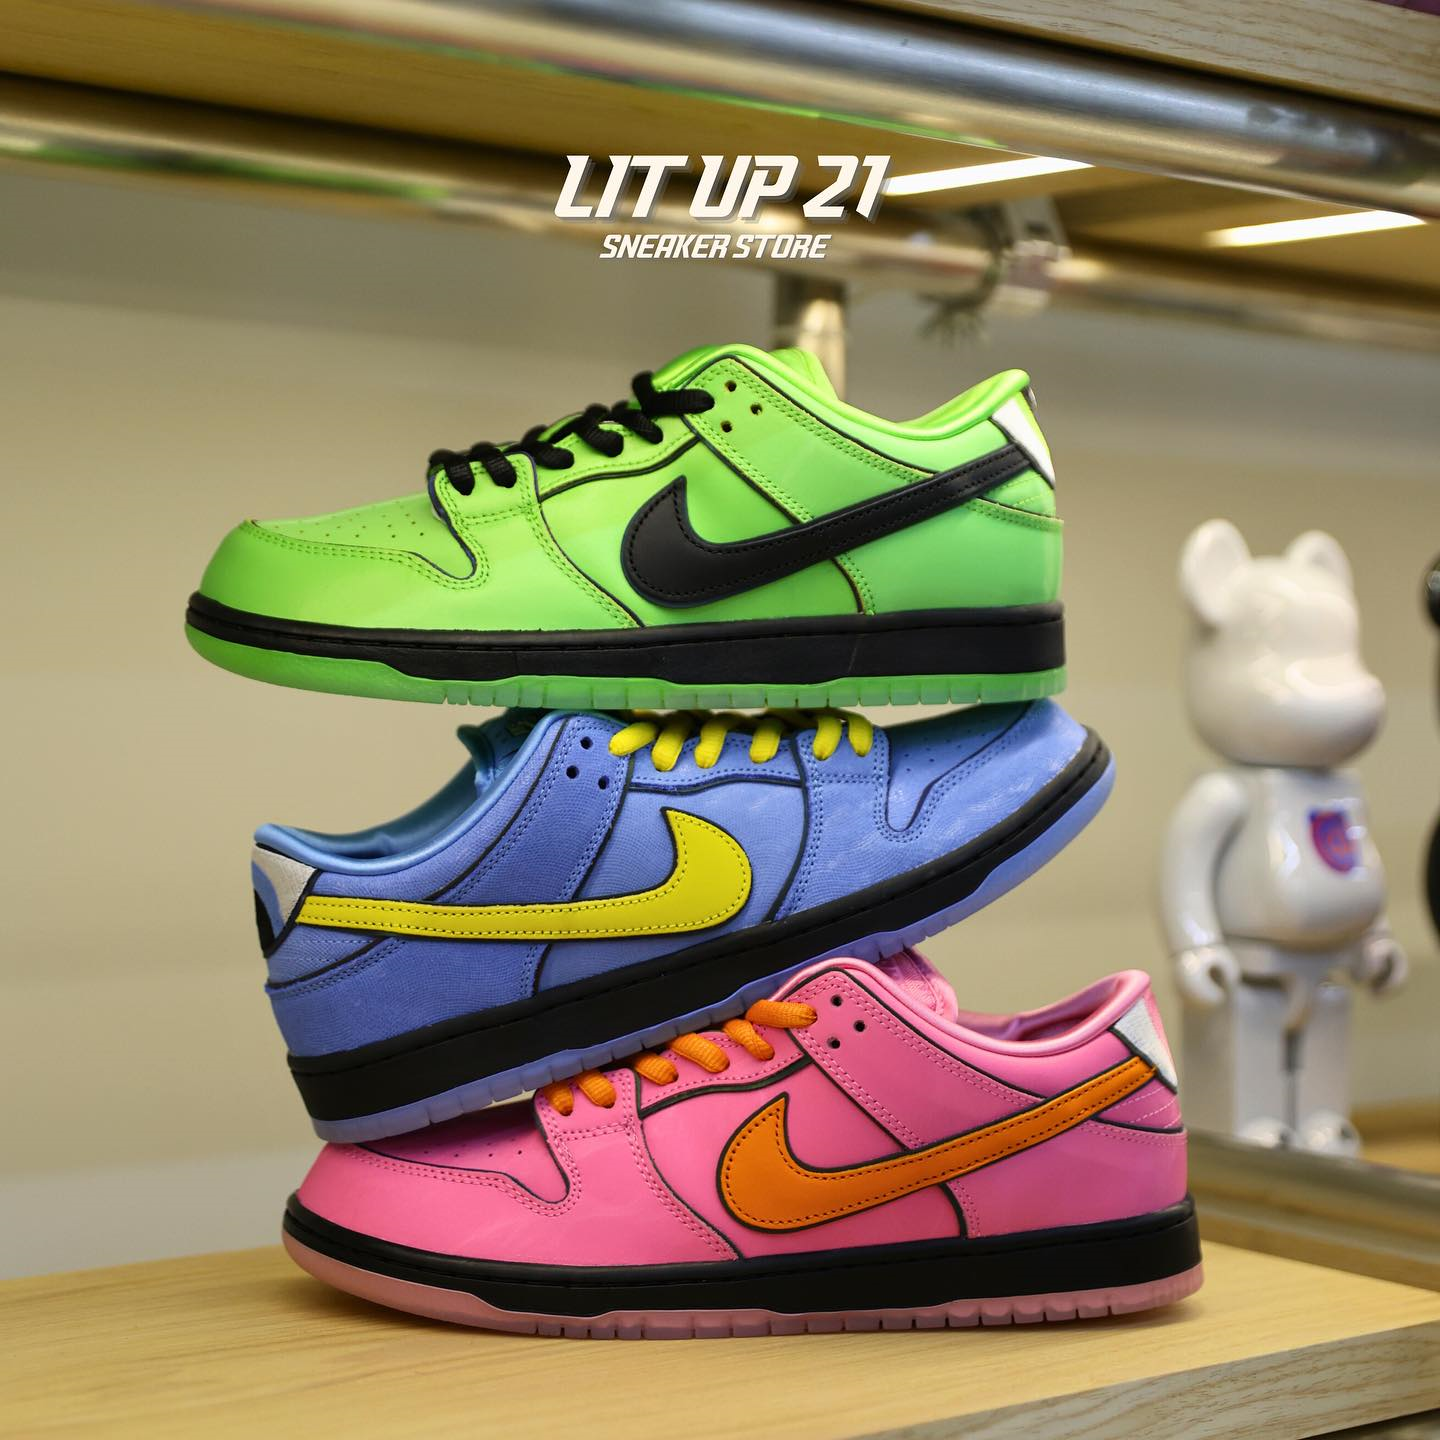 Nike x Powerpuff Girls collab shoes stocked at LIT UP 21